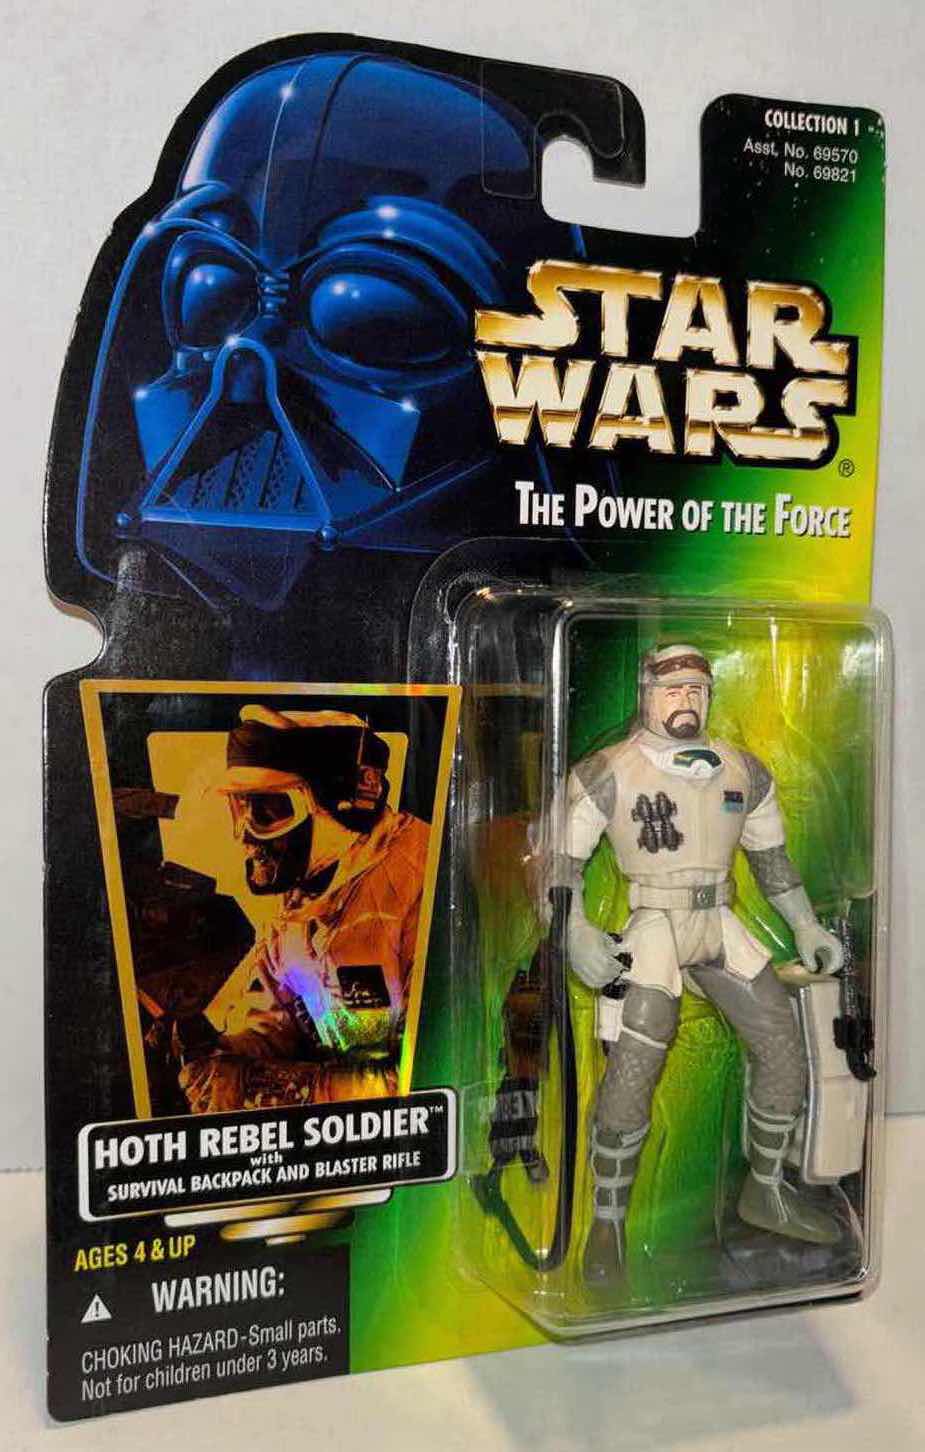 Photo 1 of NEW KENNER STAR WARS THE POWER OF THE FORCE ACTION FIGURE, HOTH REBEL SOLDIER W SURVIVAL BACKPACK & BLASTER RIFLE (1)